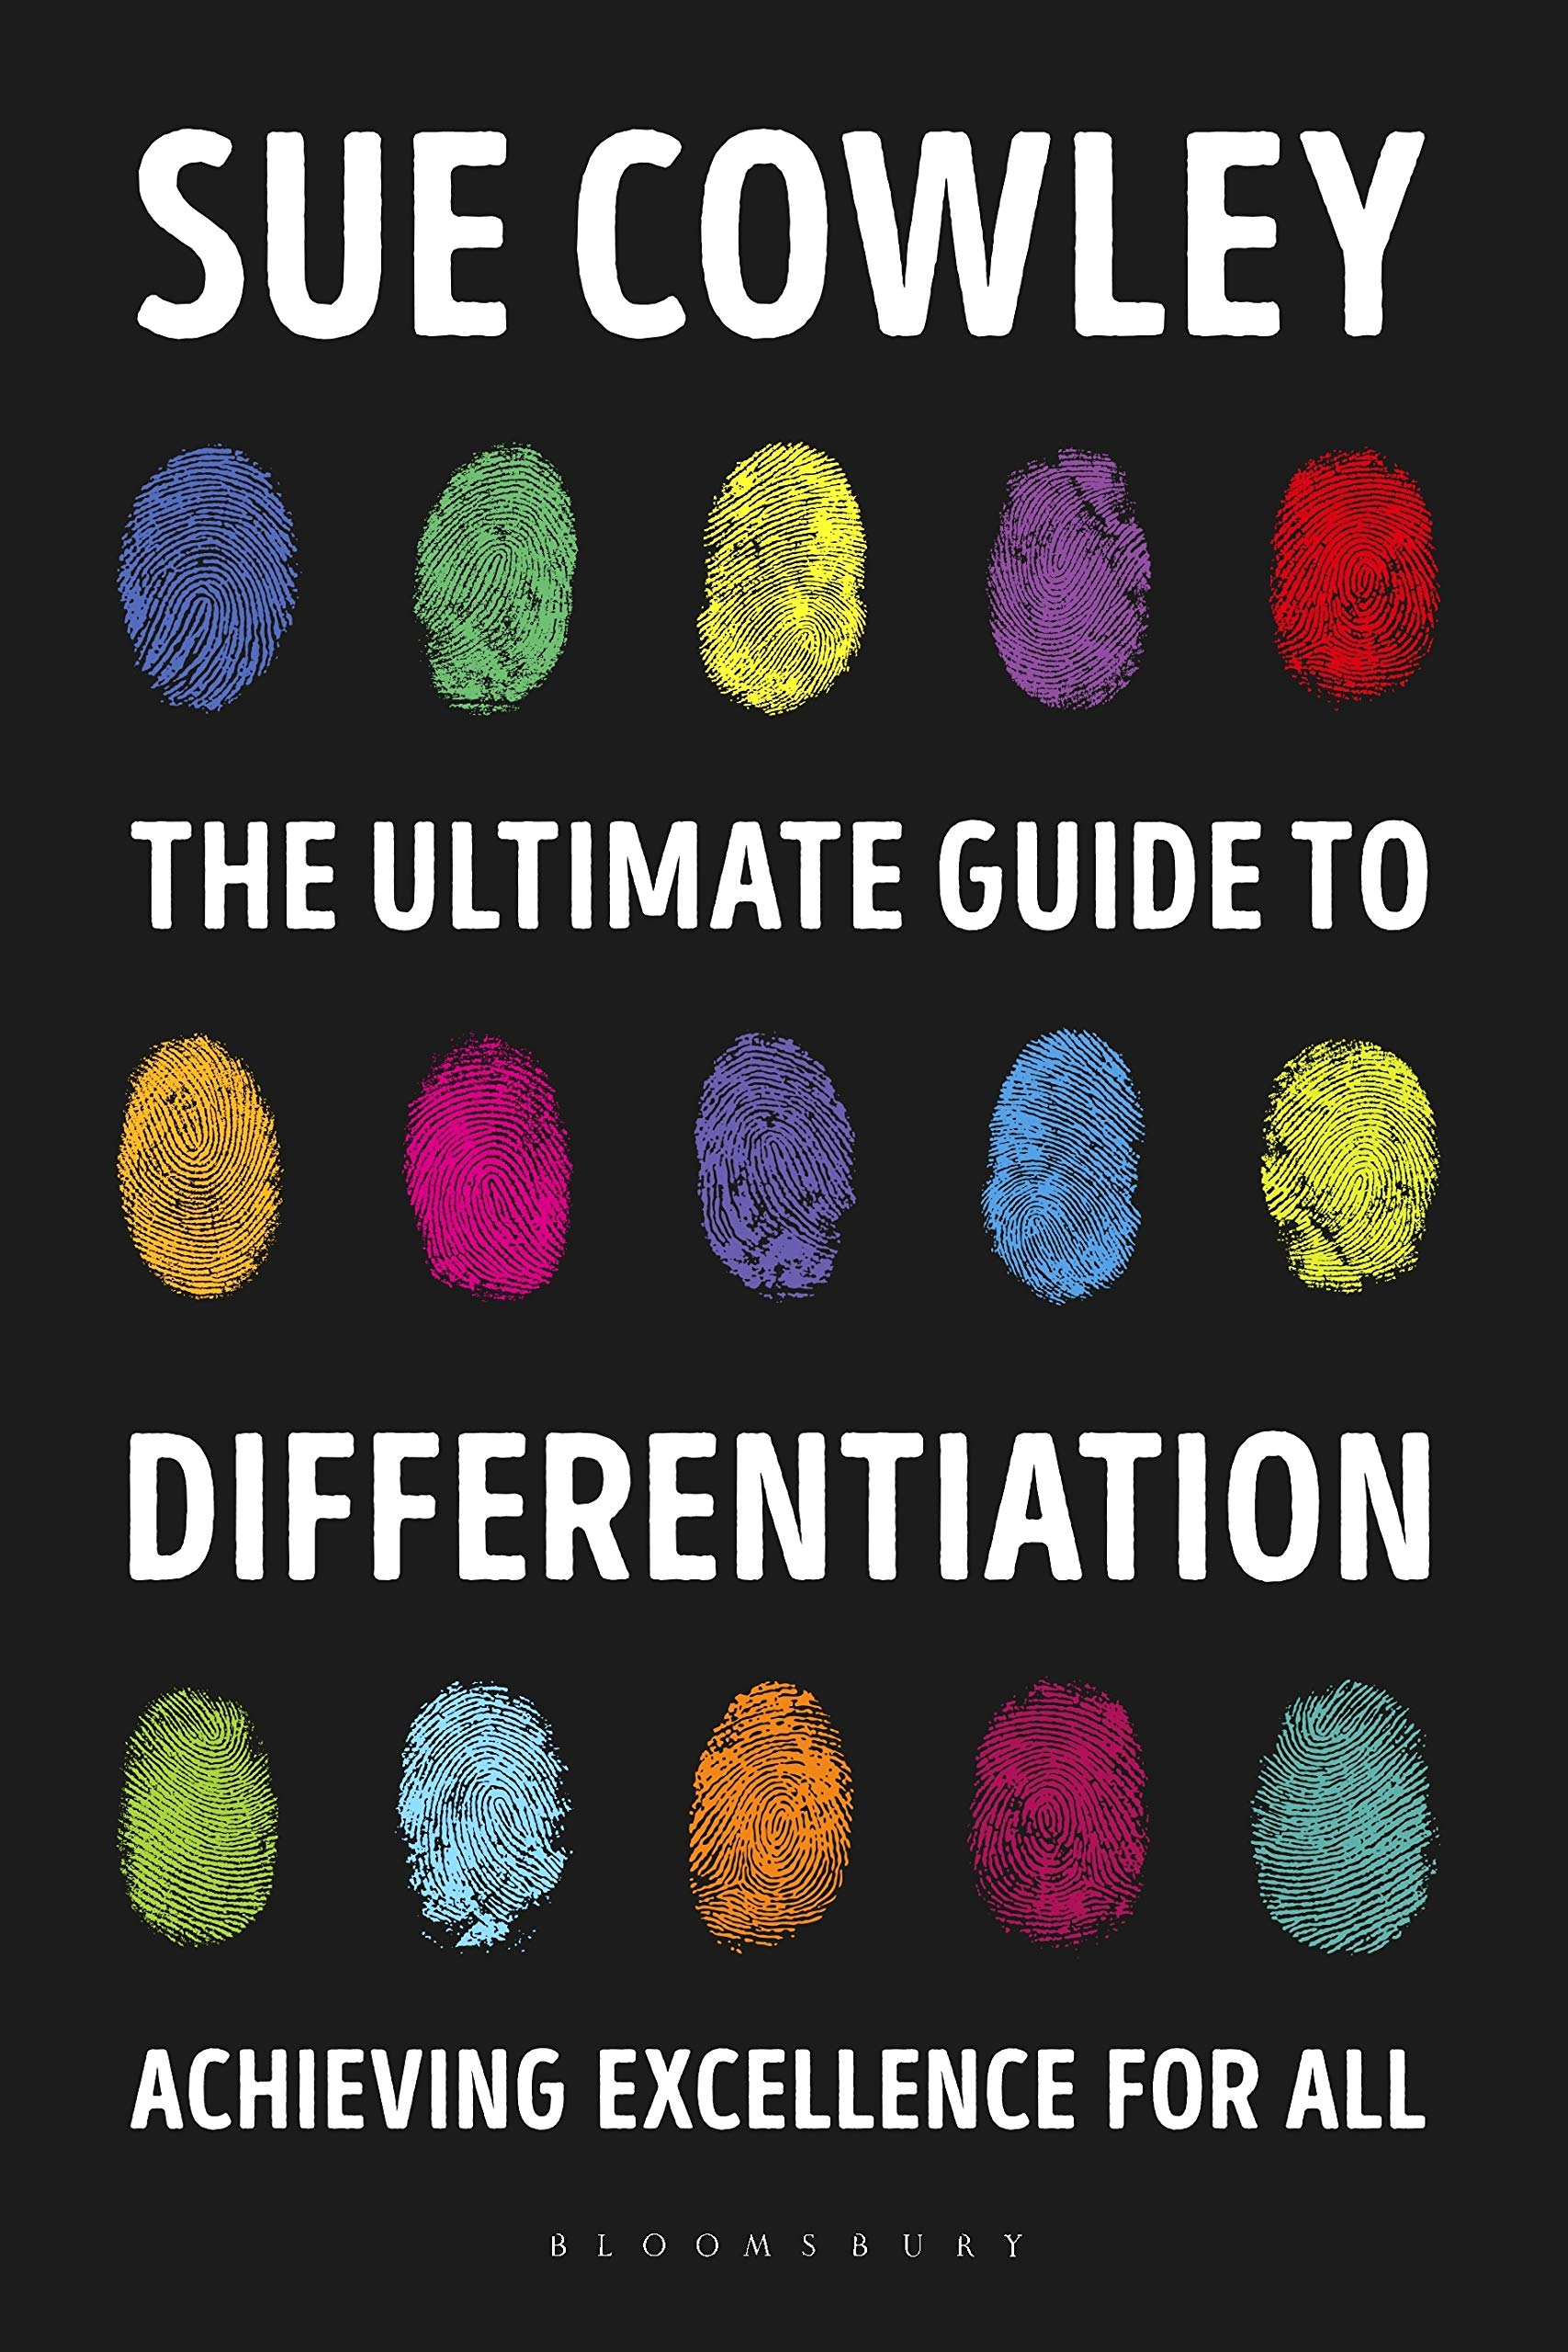 The Ultimate Guide to Differentiation: Achieving Excellence for All, by Sue Cowley book image